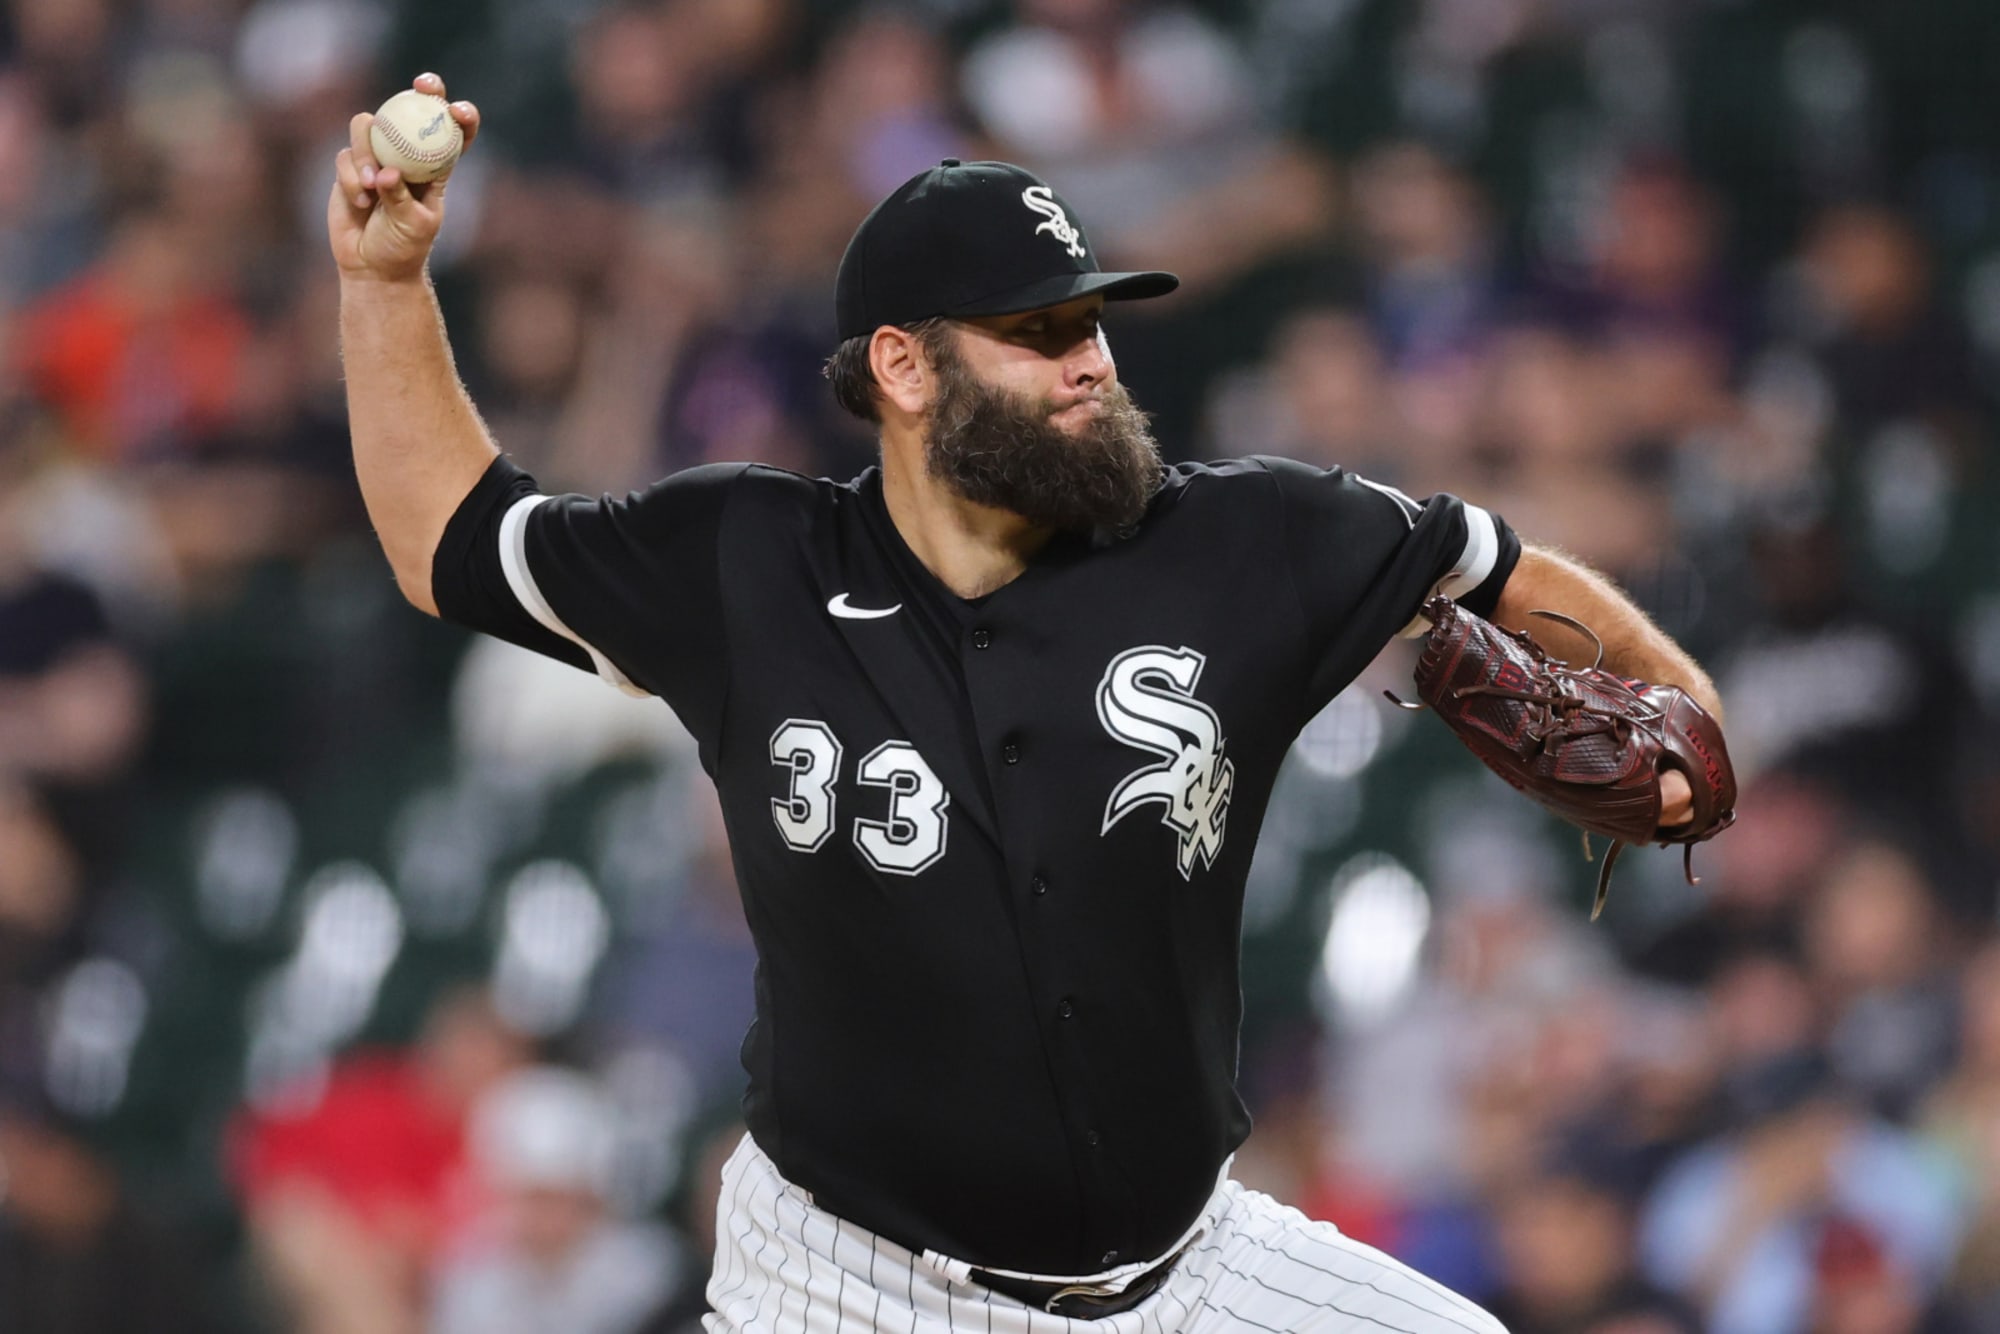 Chicago White Sox lose again to Cleveland with a bad effort